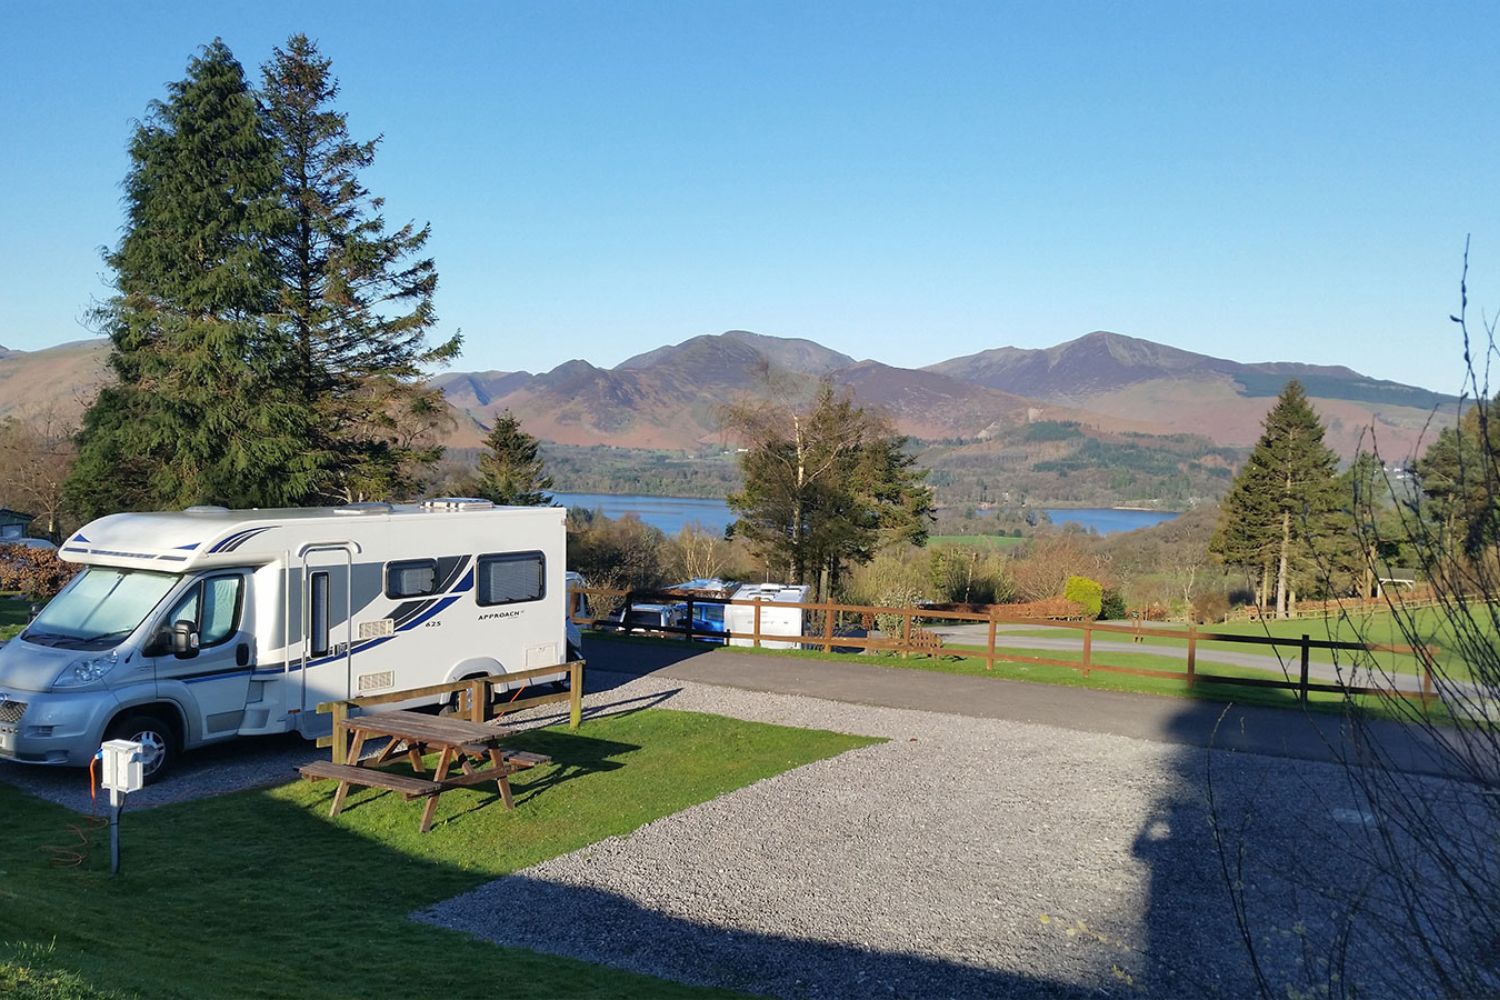 Camper van parked up with lake and mountains in background - Castlerigg Hall Caravan Site, Lake District